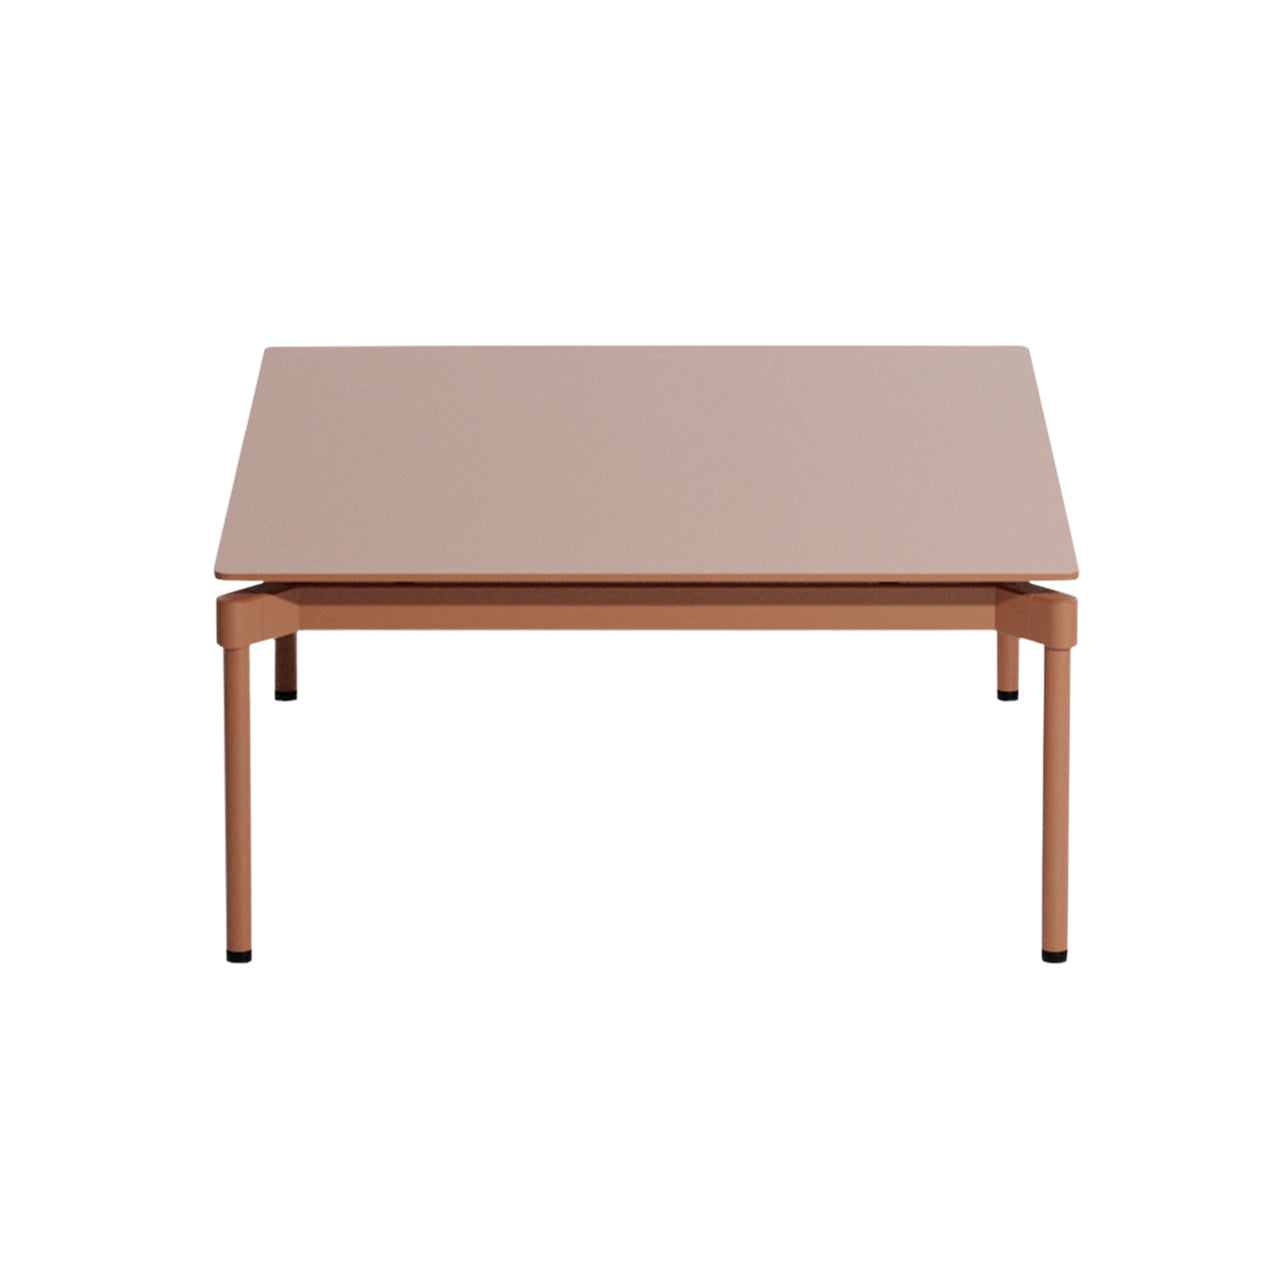 Fromme Coffee Table: Terracotta